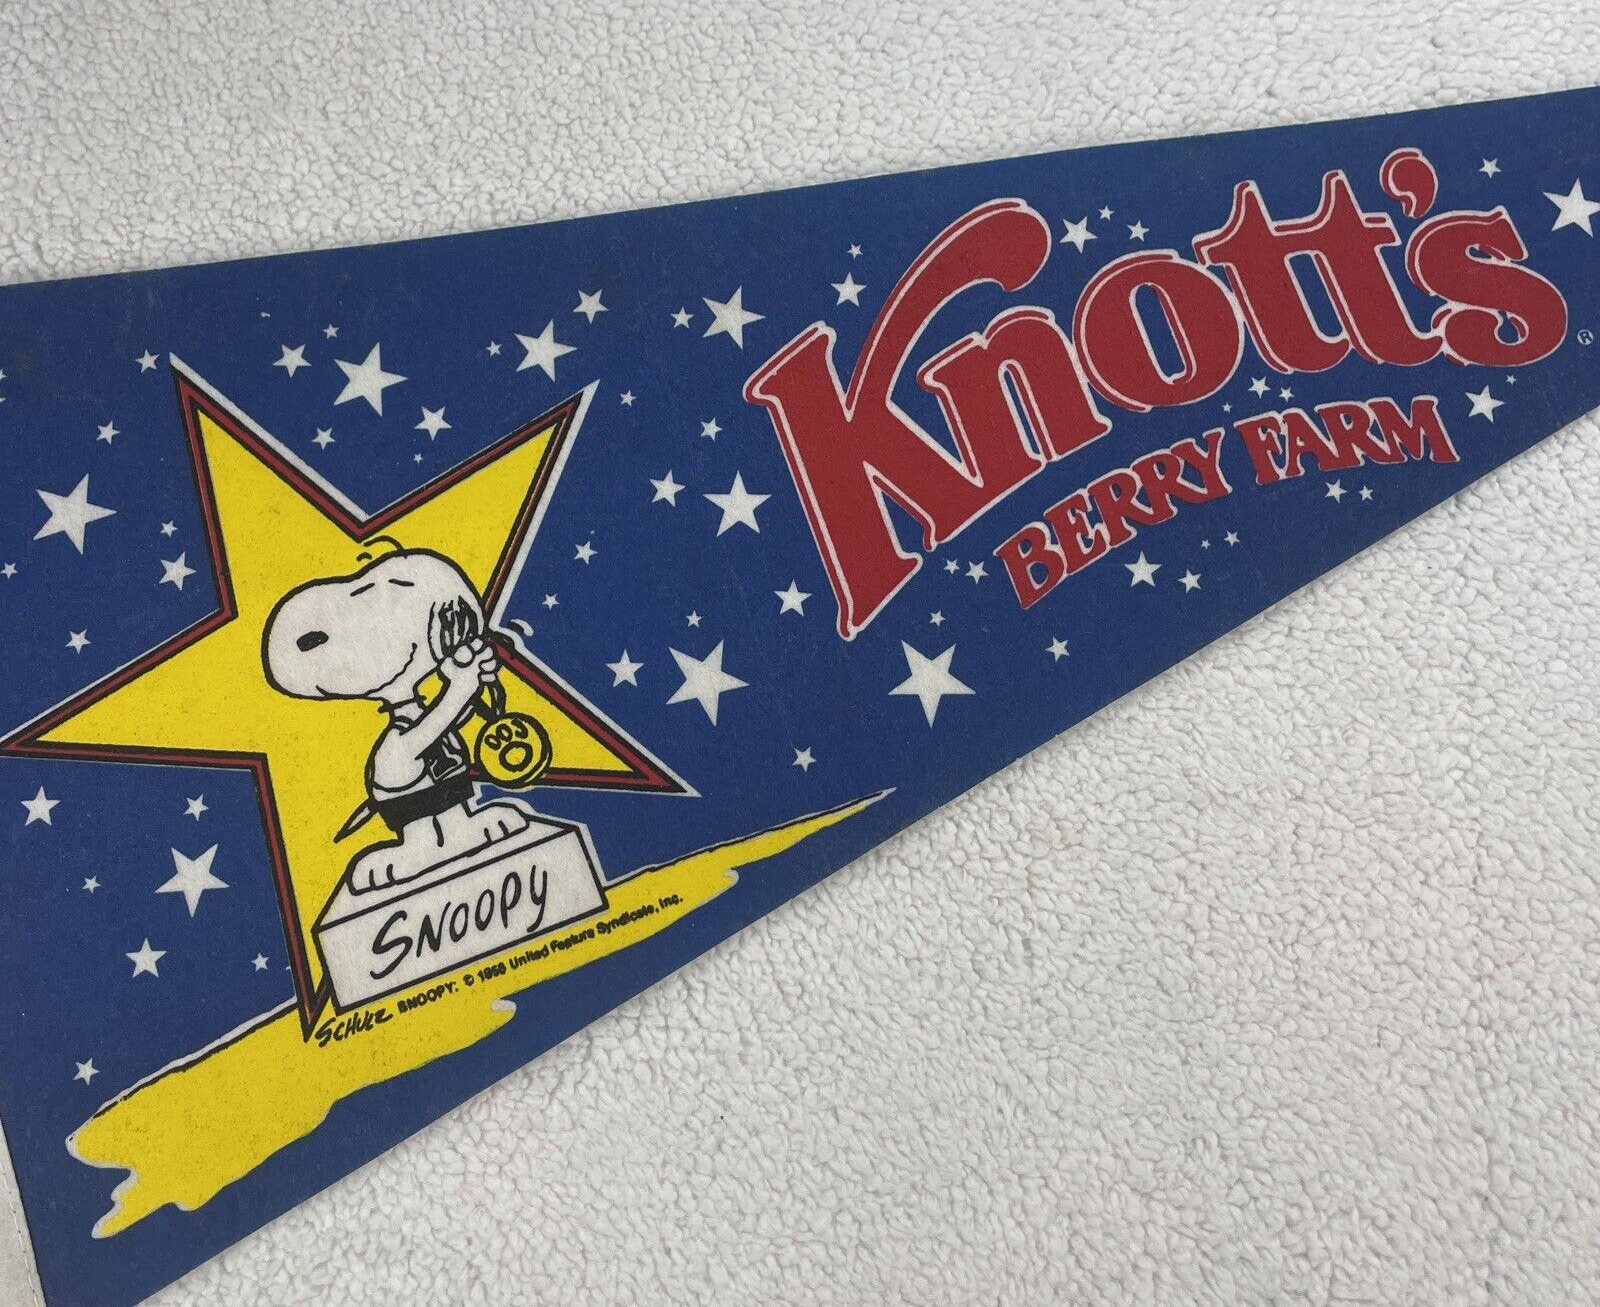 Knott's Berry Farm Snoopy Schulz United Feature Syndicate Pennant Vintage READ